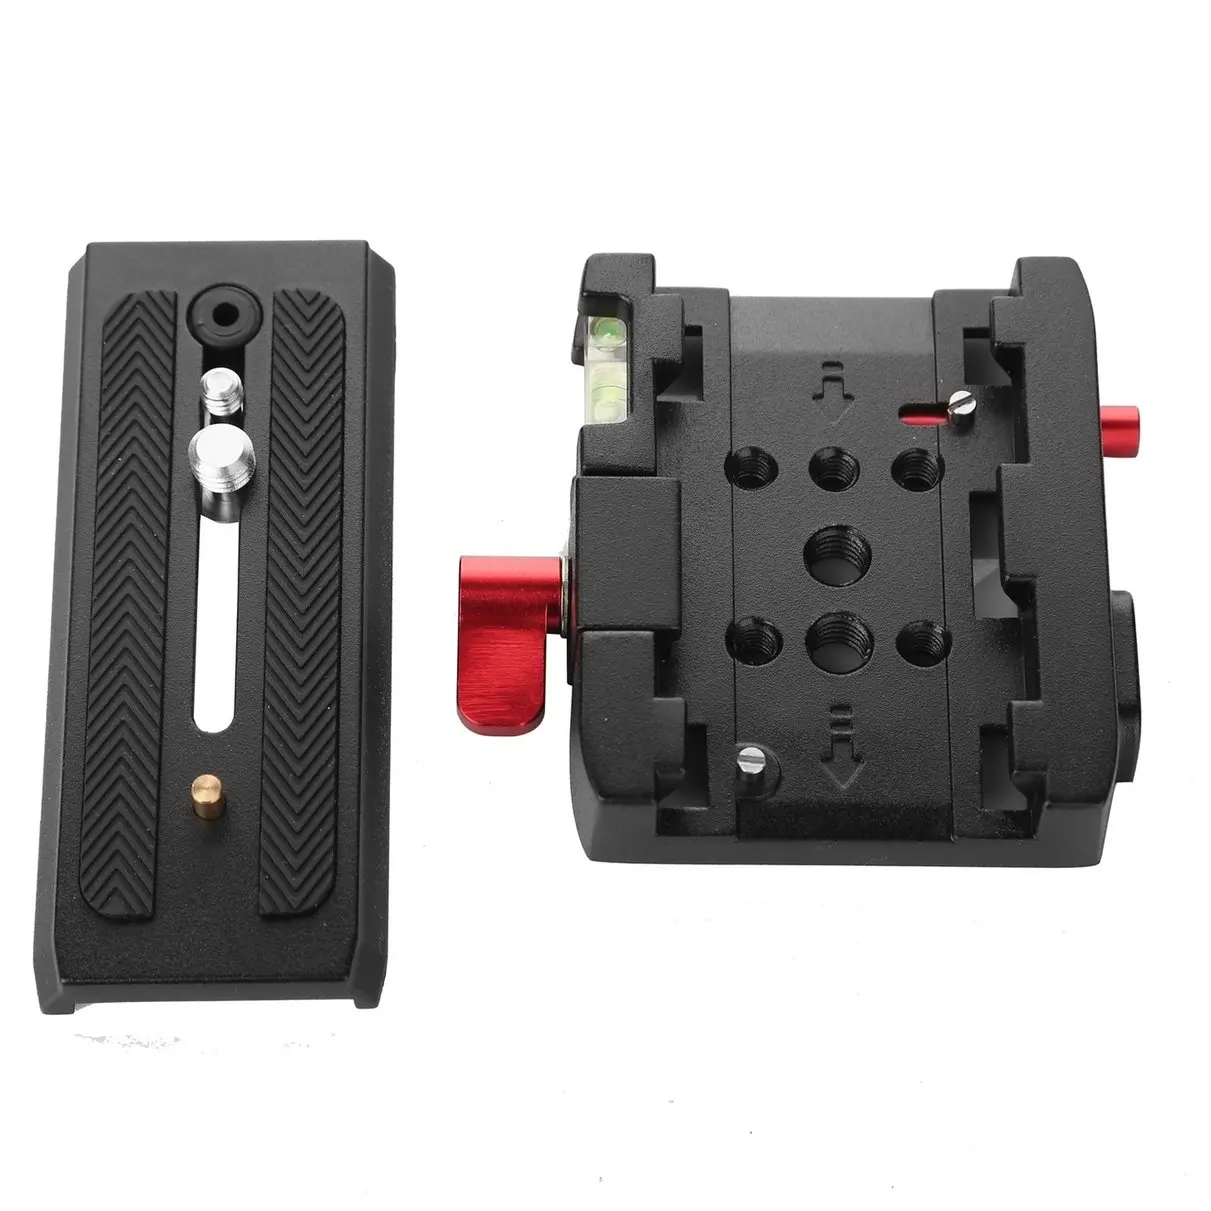 

EACHSHOT Quick Release Clamp Adapter + Quick Release Plate P200 Compatible for Manfrotto 501 500AH 701HDV 503HDV Q5